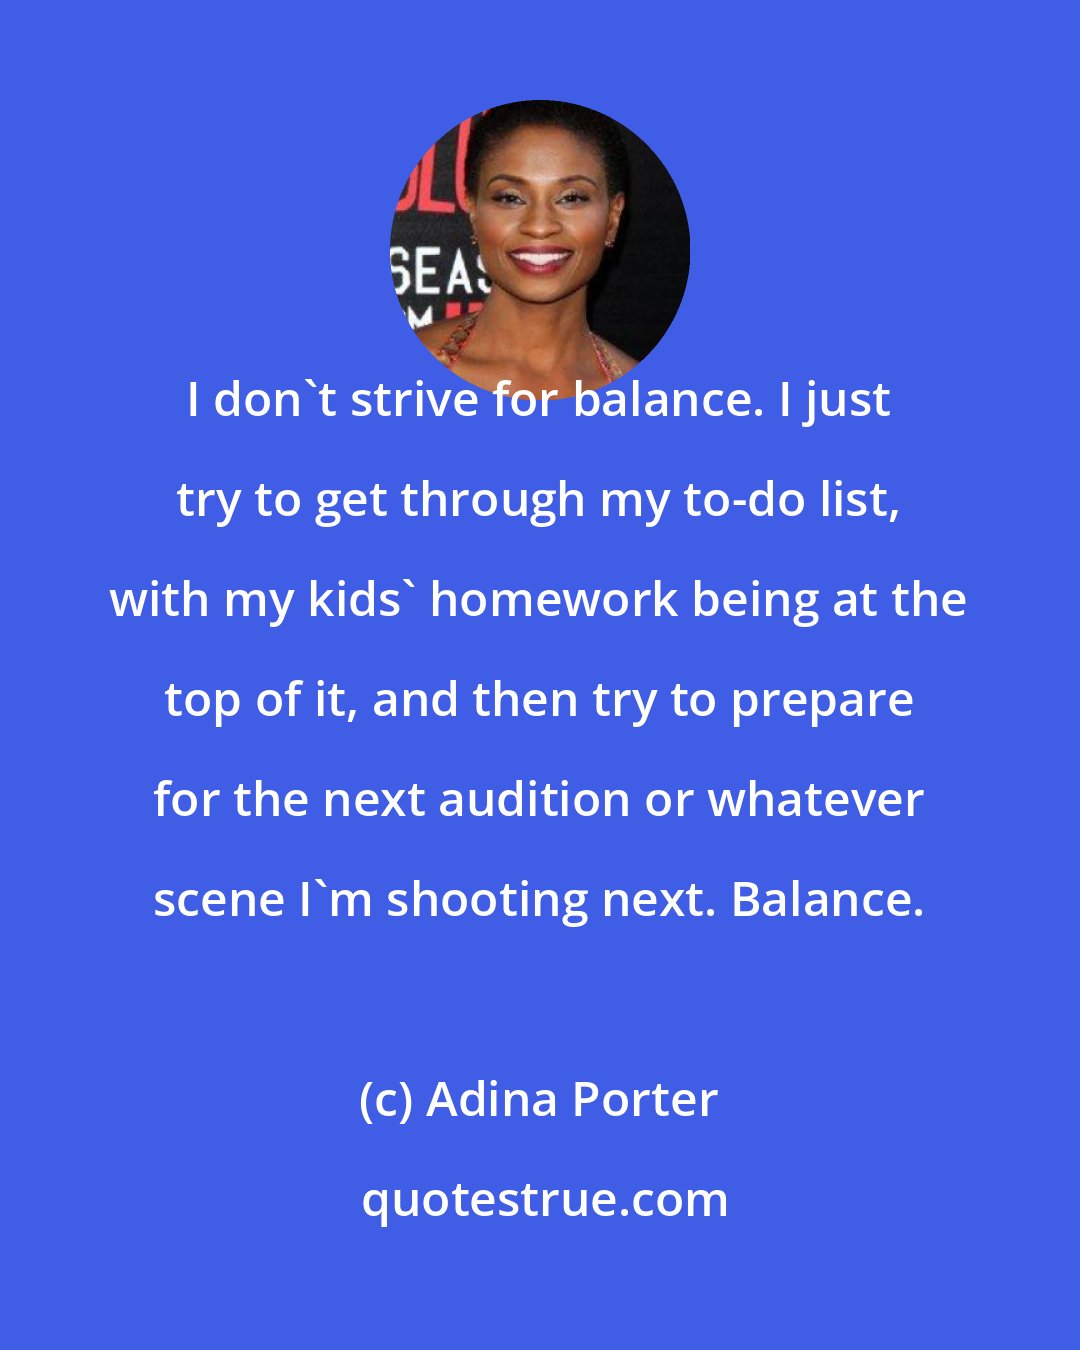 Adina Porter: I don't strive for balance. I just try to get through my to-do list, with my kids' homework being at the top of it, and then try to prepare for the next audition or whatever scene I'm shooting next. Balance.